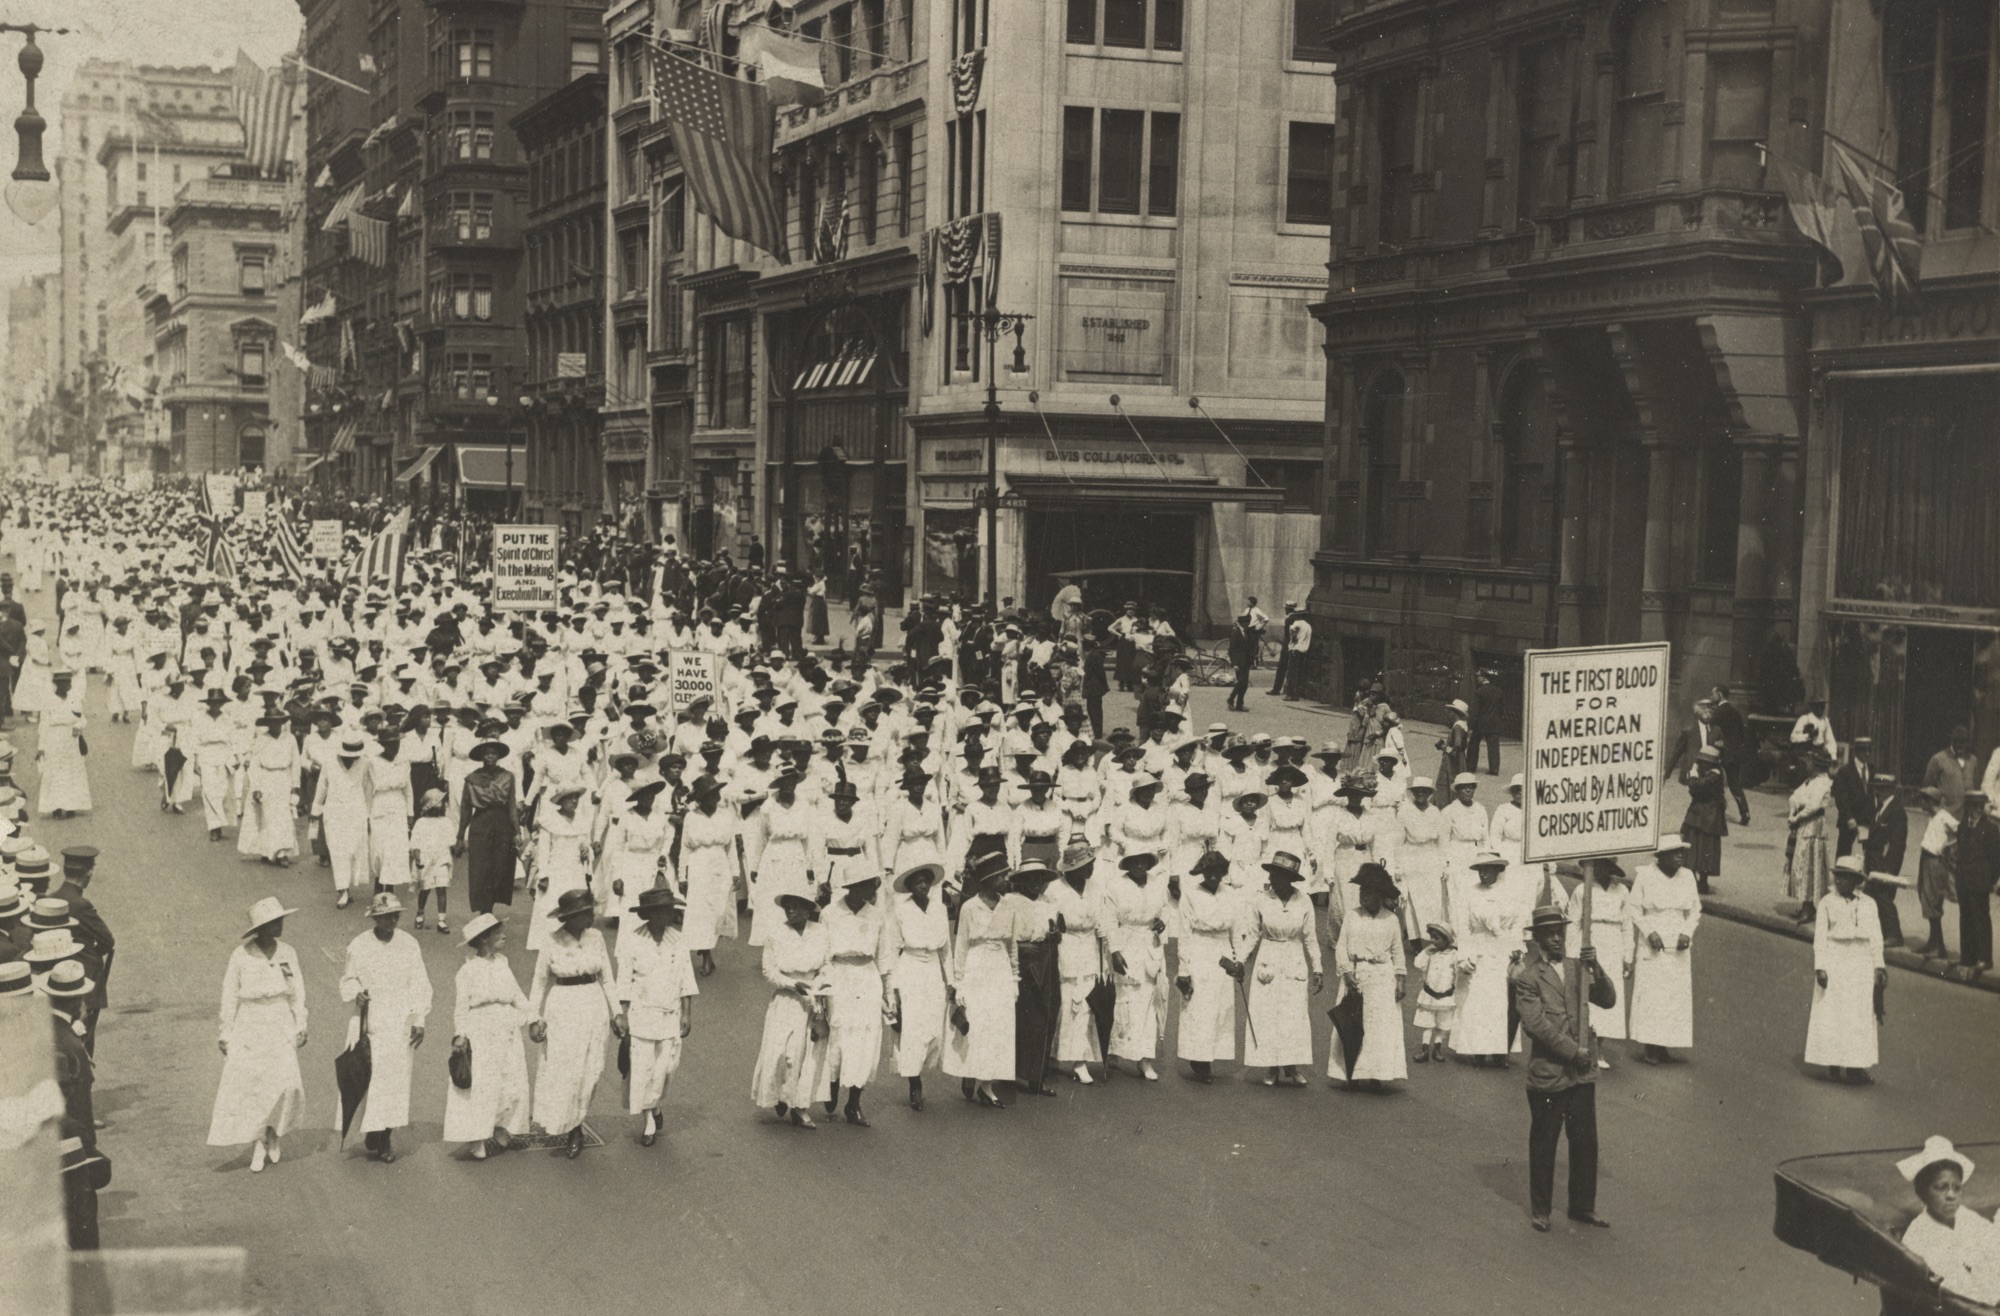 A photograph of a silent march of Black Americans in New York City in 1917, protesting the East St Louis race riots.